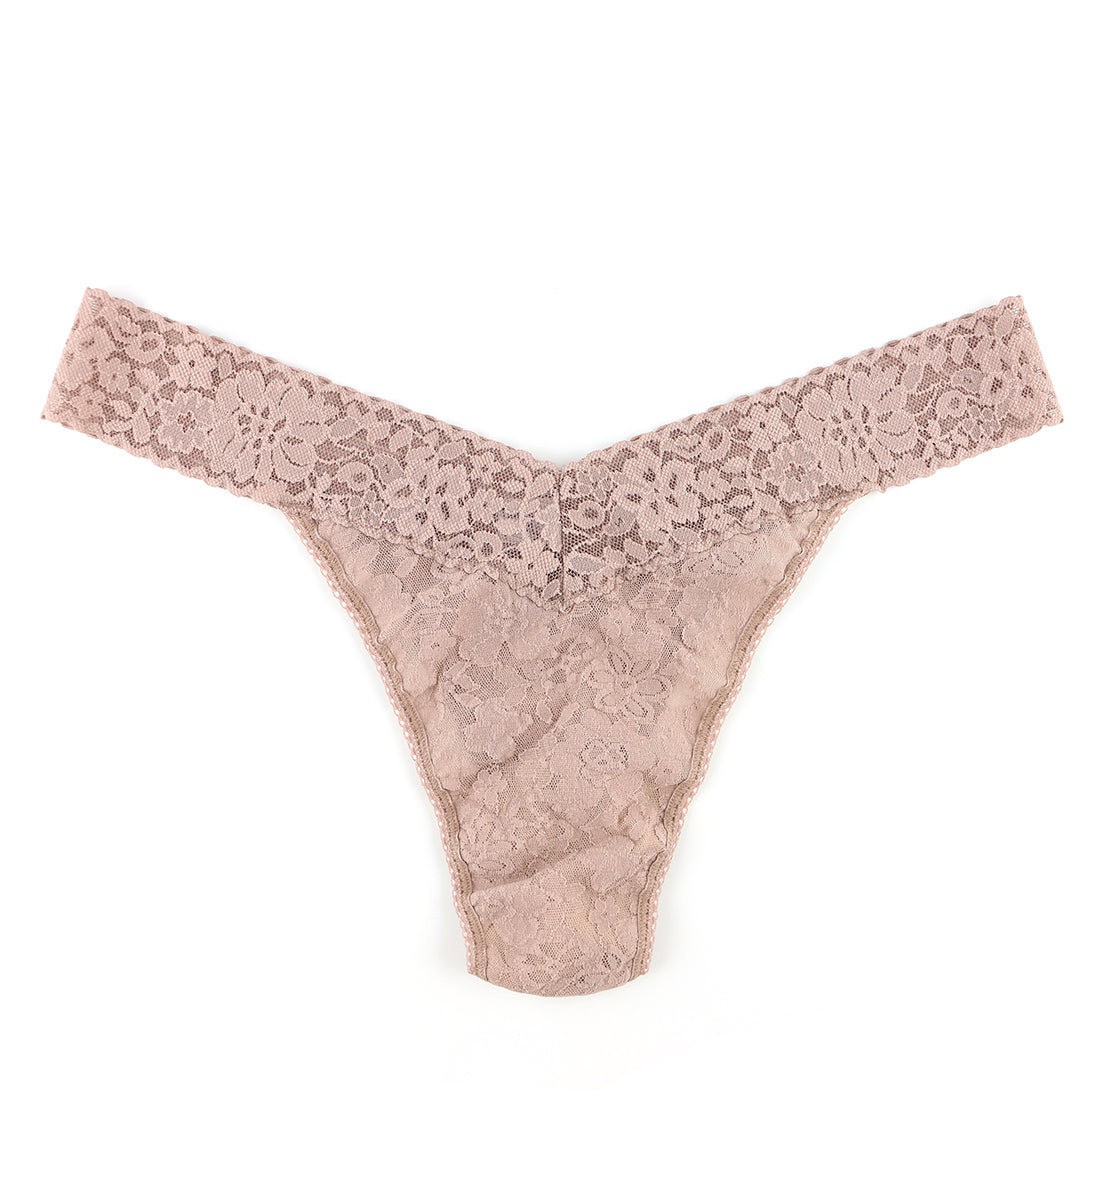 Hanky Panky Daily Lace Original Rise Thong PLUS (771101XP),Taupe - Taupe,One Size